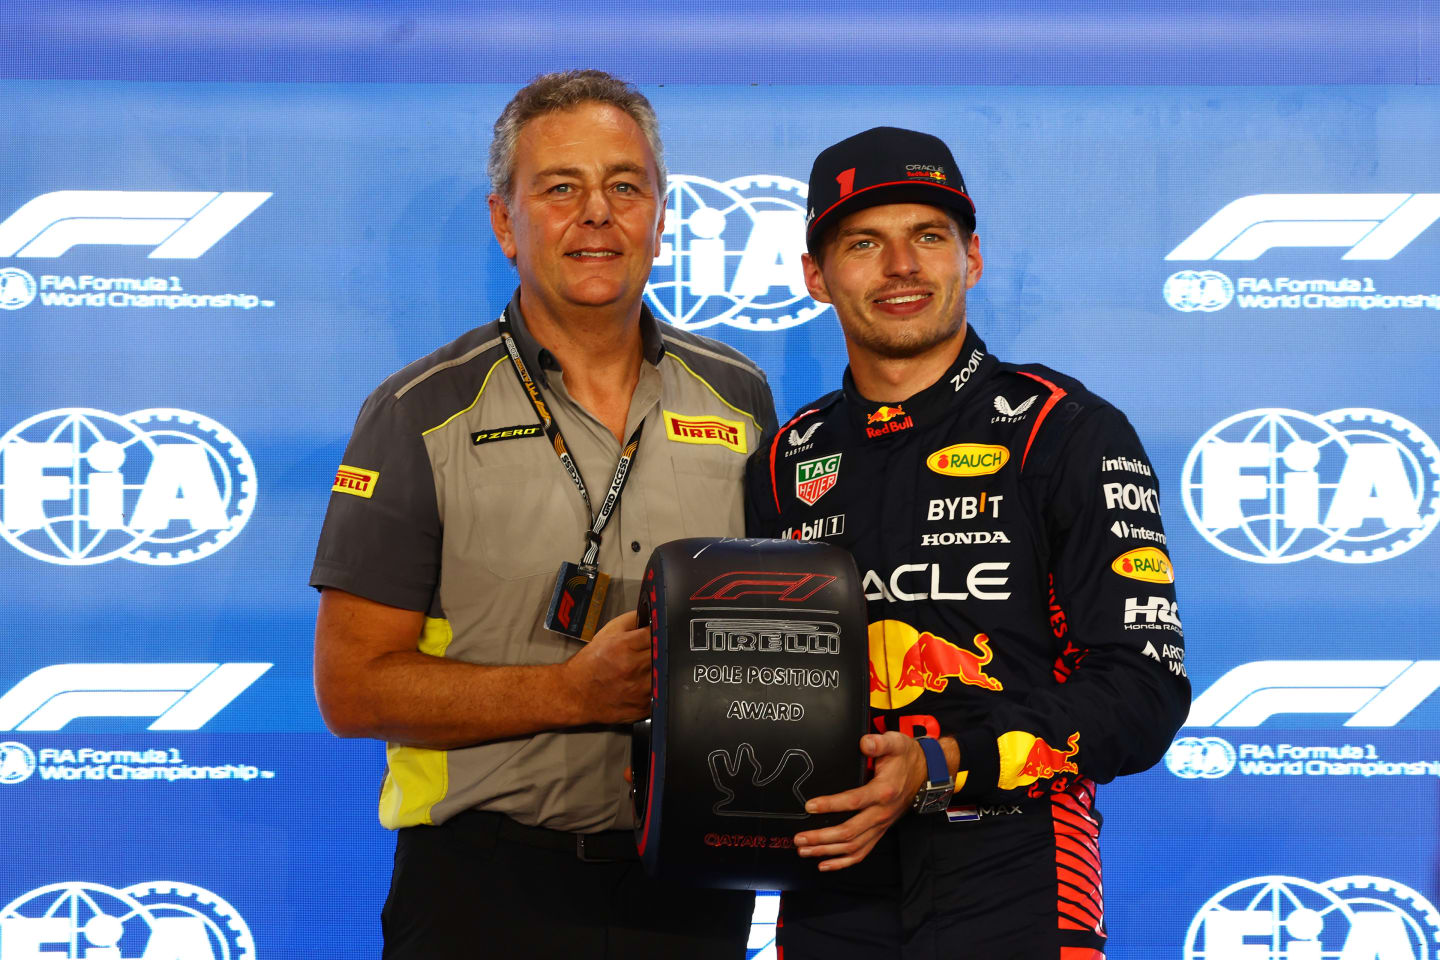 LUSAIL CITY, QATAR - OCTOBER 06: Pole position qualifier Max Verstappen of the Netherlands and Oracle Red Bull Racing is presented with the Pirelli Pole Position Trophy by Director of Pirelli F1 Mario Isola during qualifying ahead of the F1 Grand Prix of Qatar at Lusail International Circuit on October 06, 2023 in Lusail City, Qatar. (Photo by Mark Thompson/Getty Images)